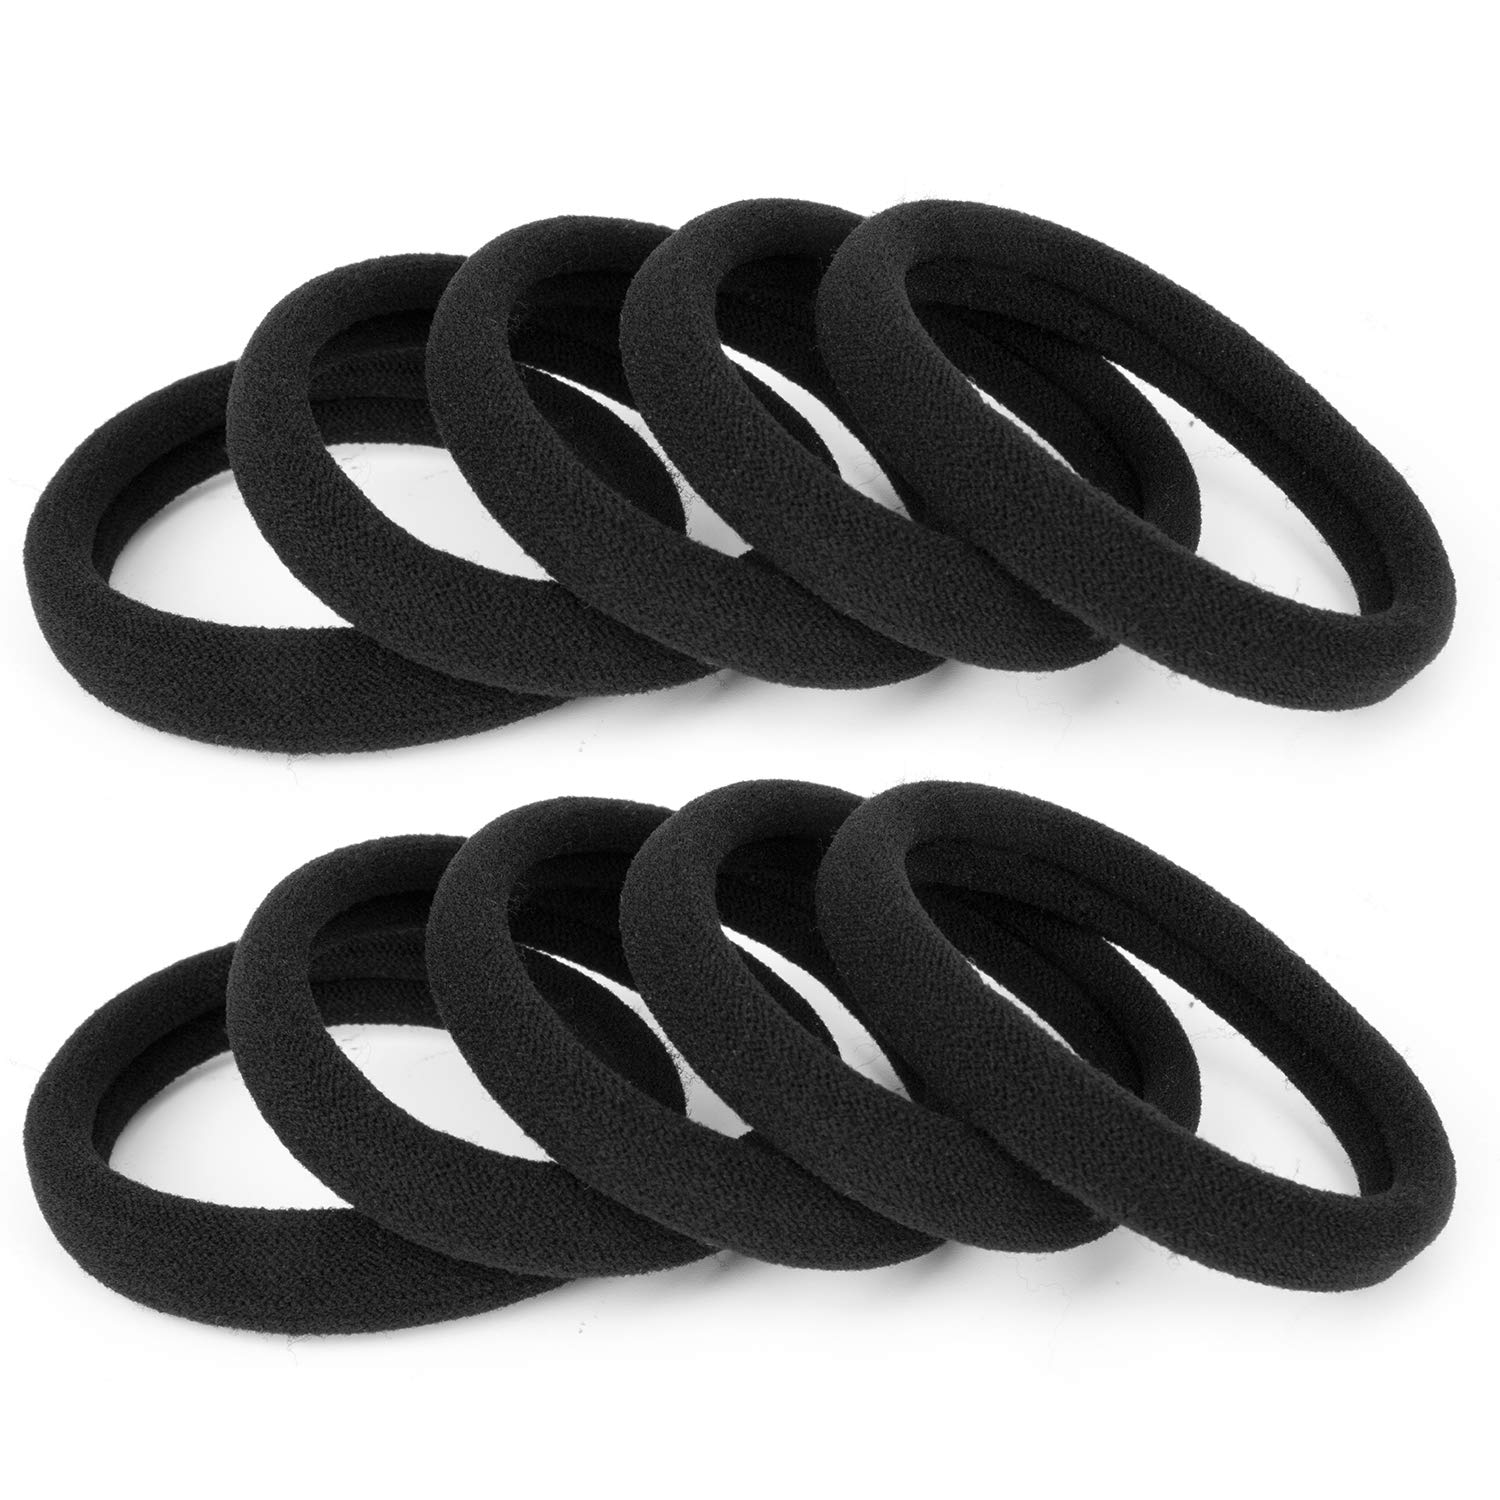 100PCS Large Black Hair Ties Band Thick Cotton Seamless Ponytail Holders  Hair Elastics Hair Bands for